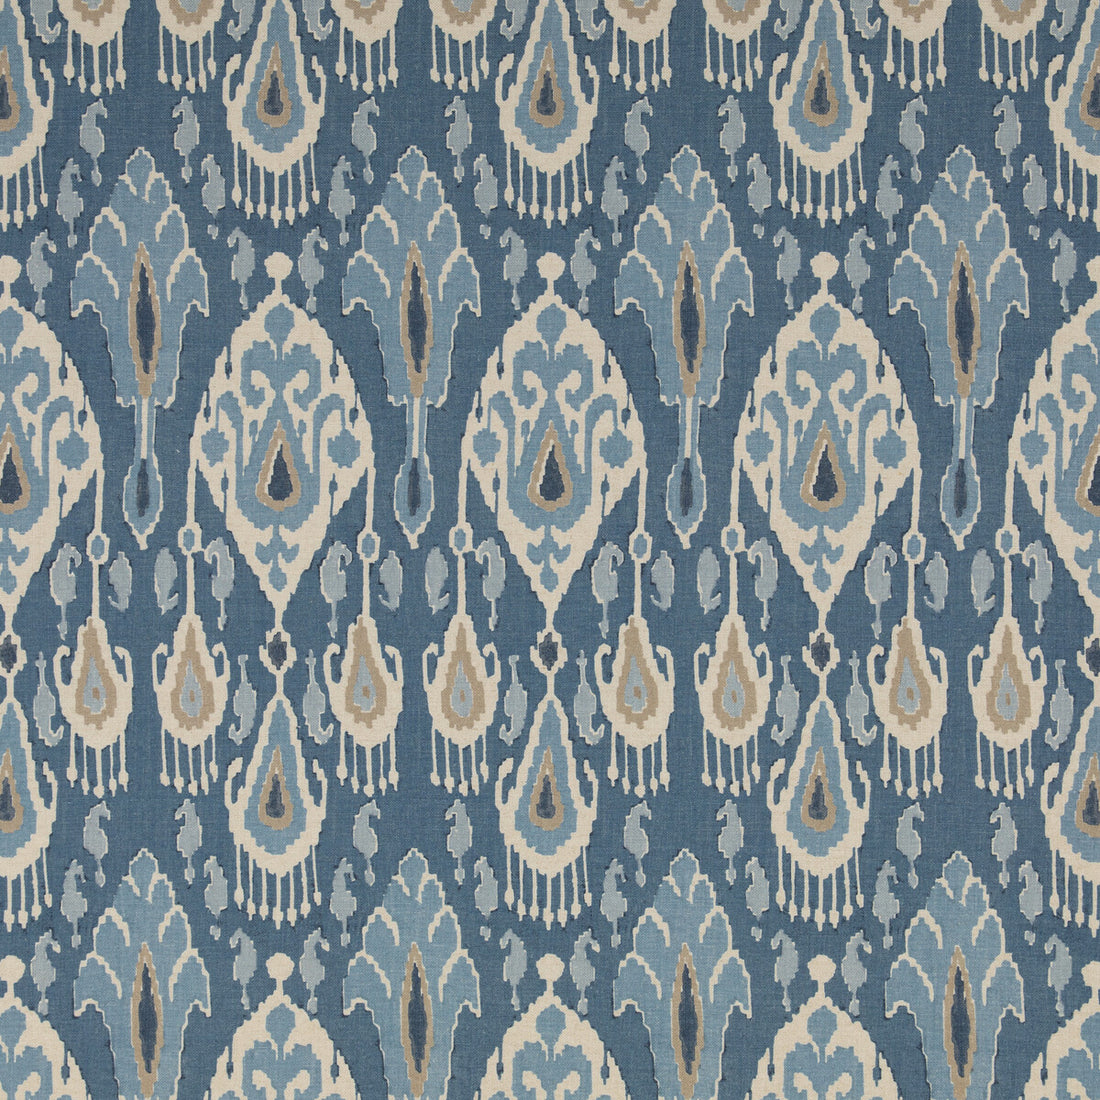 Ikat Bokhara fabric in blue color - pattern BP10853.1.0 - by G P &amp; J Baker in the Chifu collection